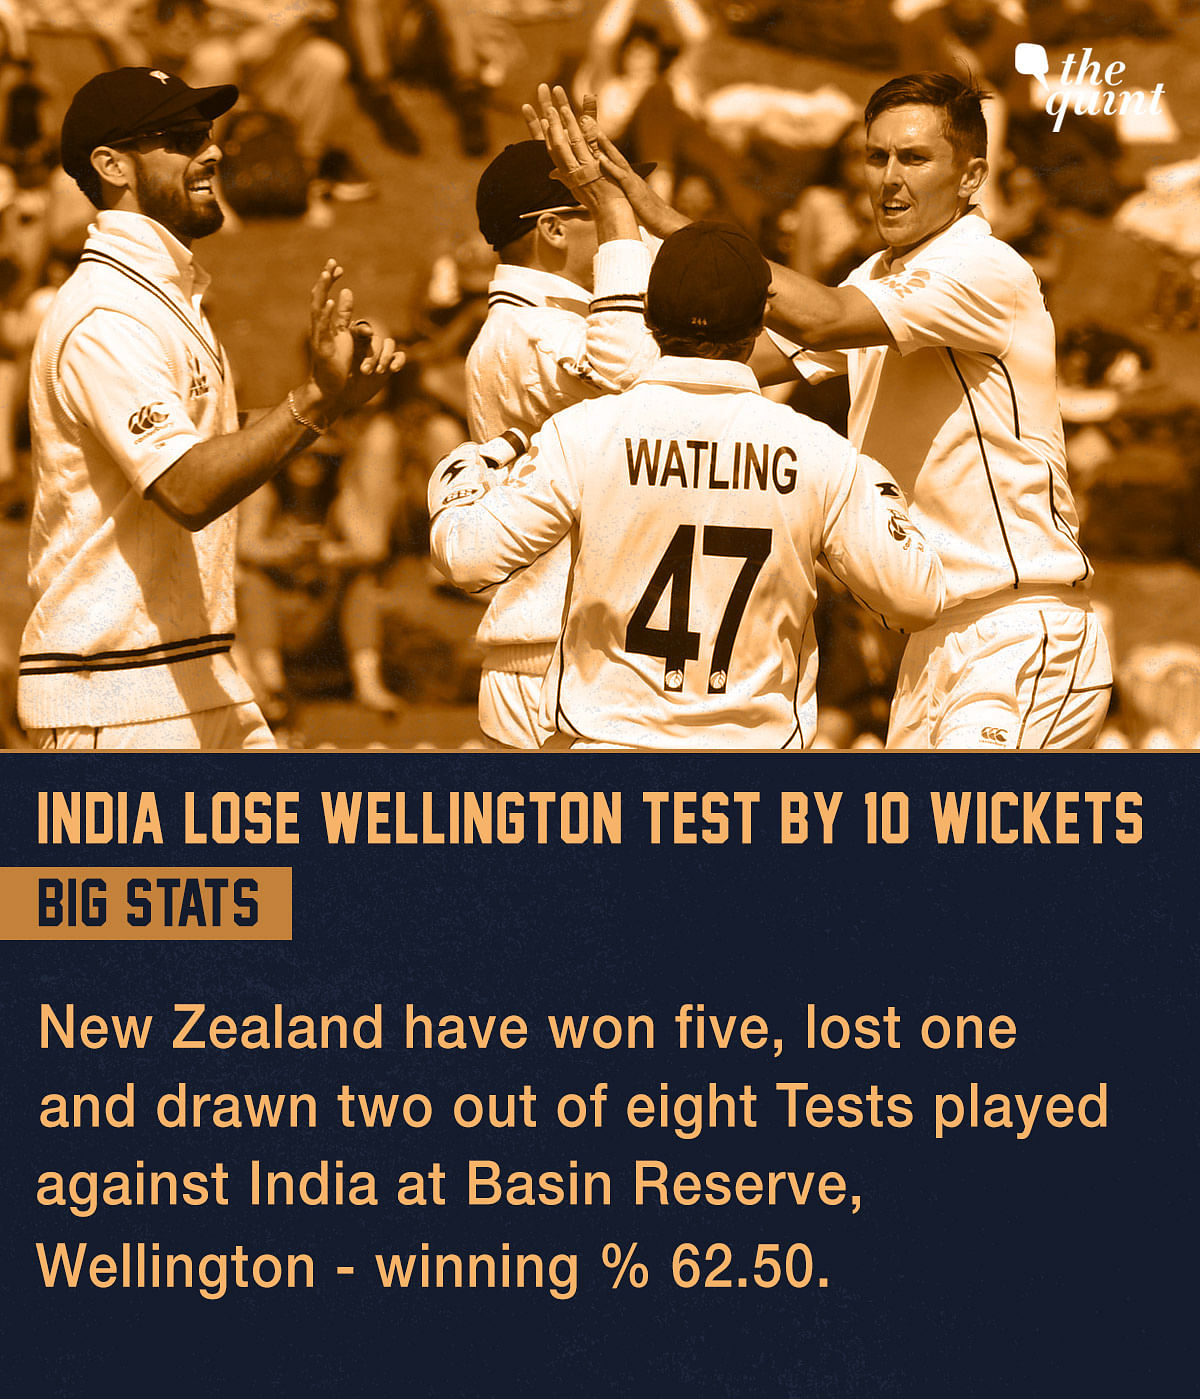 Here’s a look at some of the records and numbers from the first Test between India and New Zealand at Wellington.